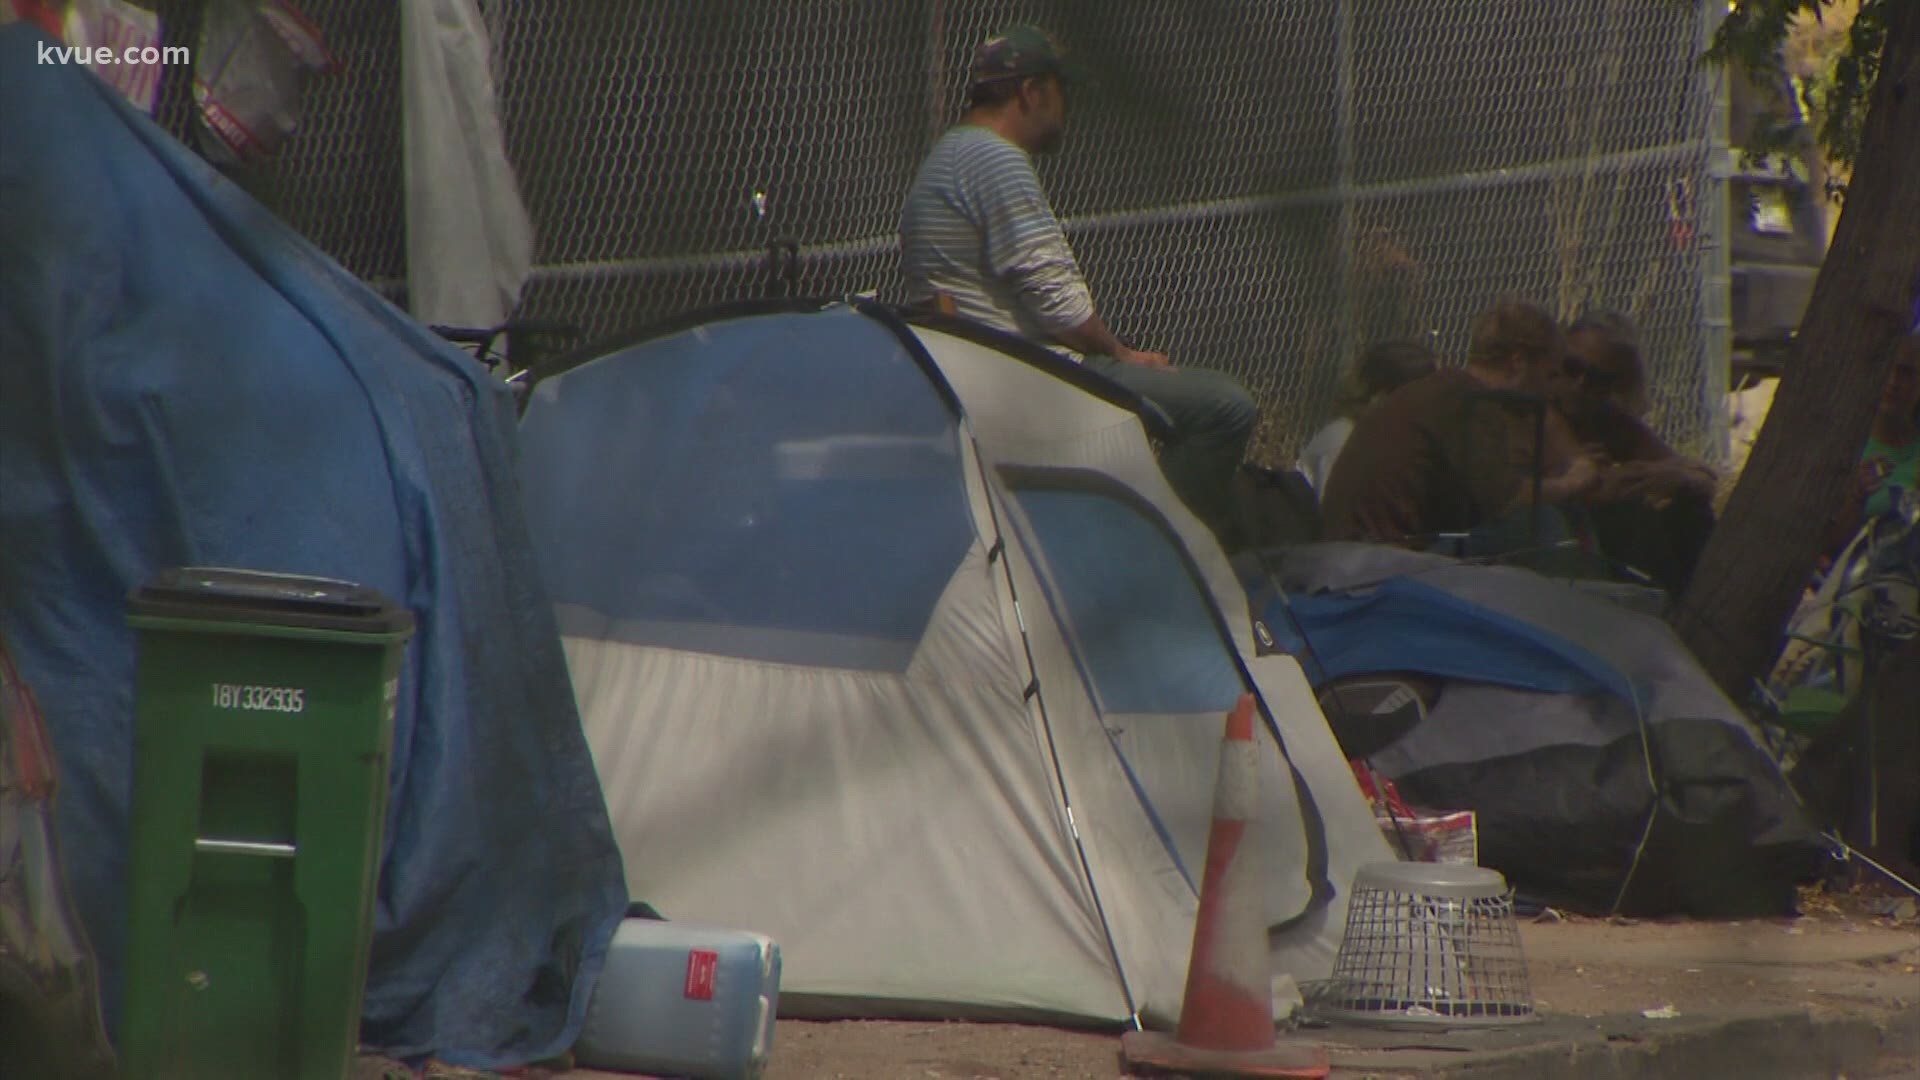 A lawsuit has been filed over an Austin homeless ordinance petition. The Save Austin Now group is trying to get a ban on homeless camping reinstated.